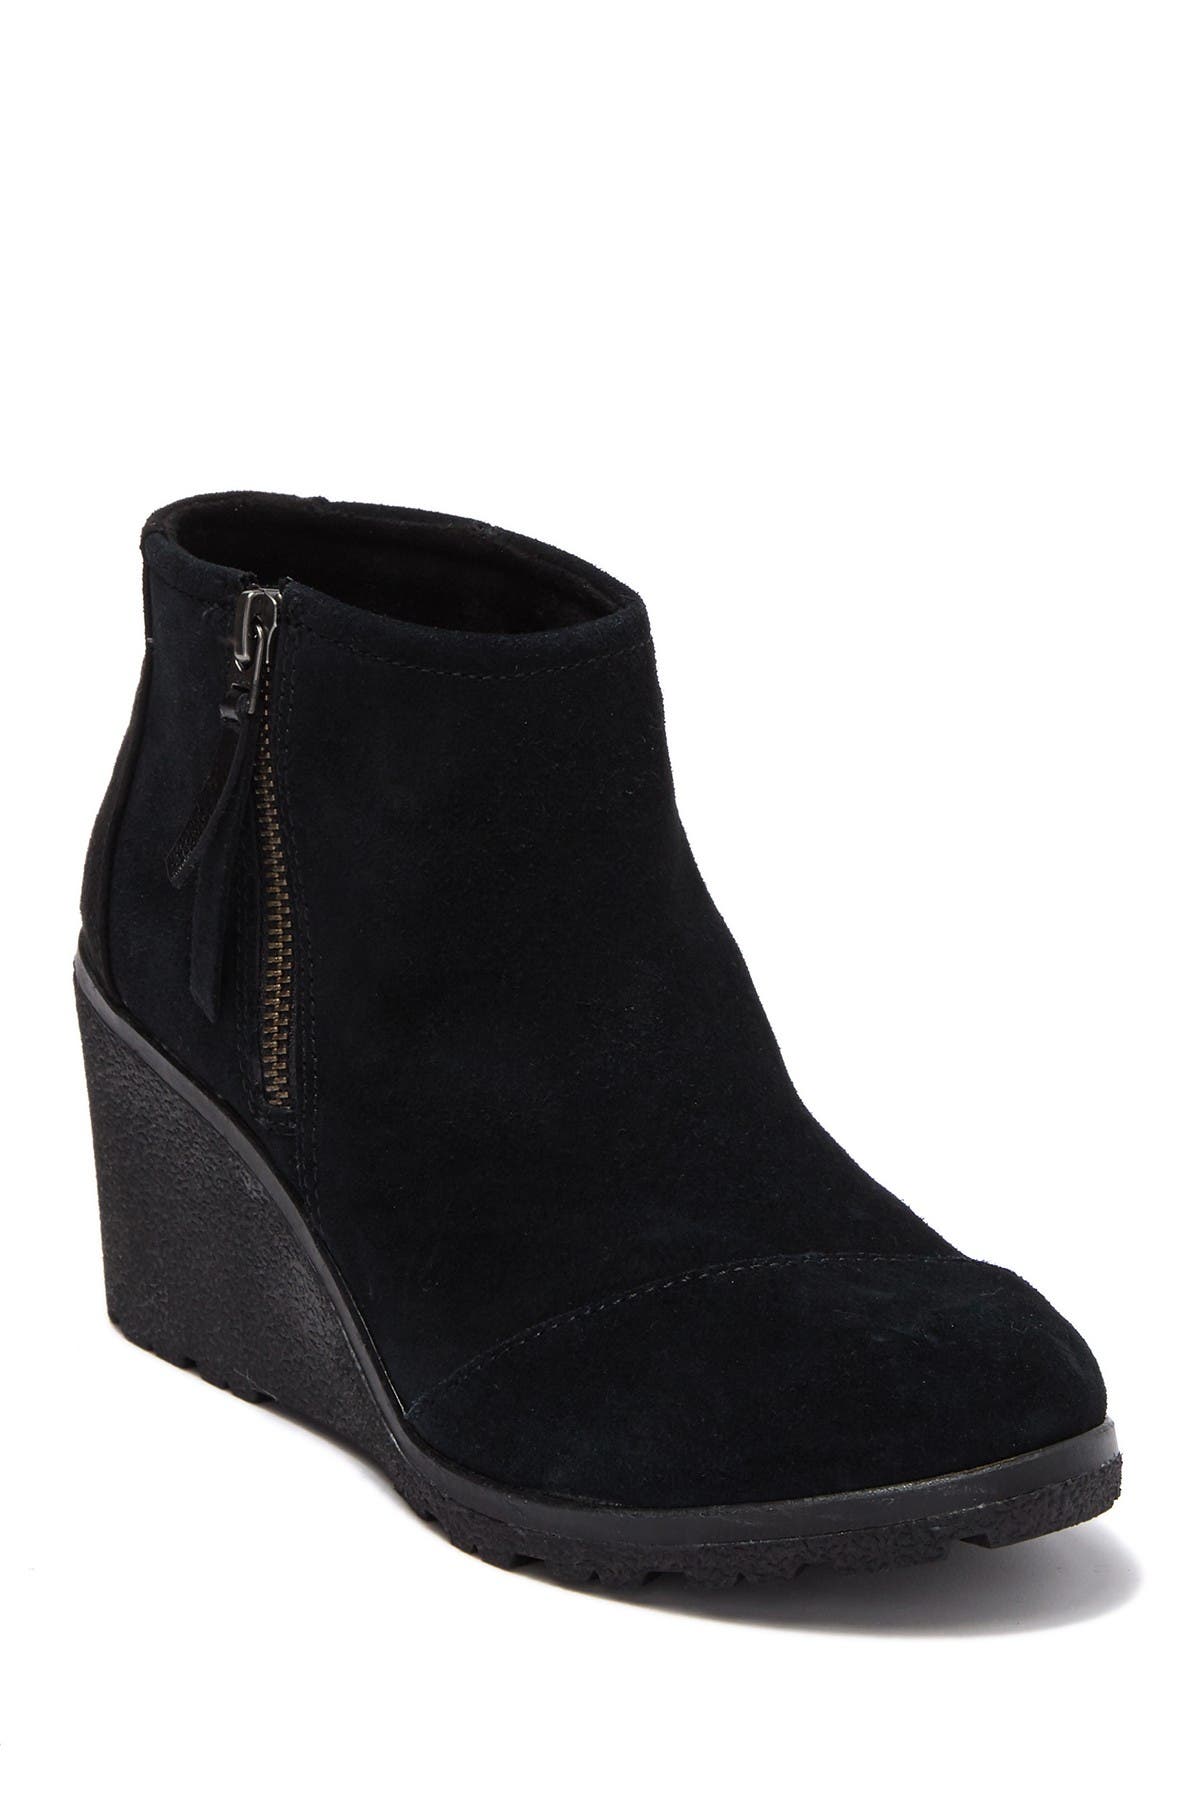 toms avery bootie